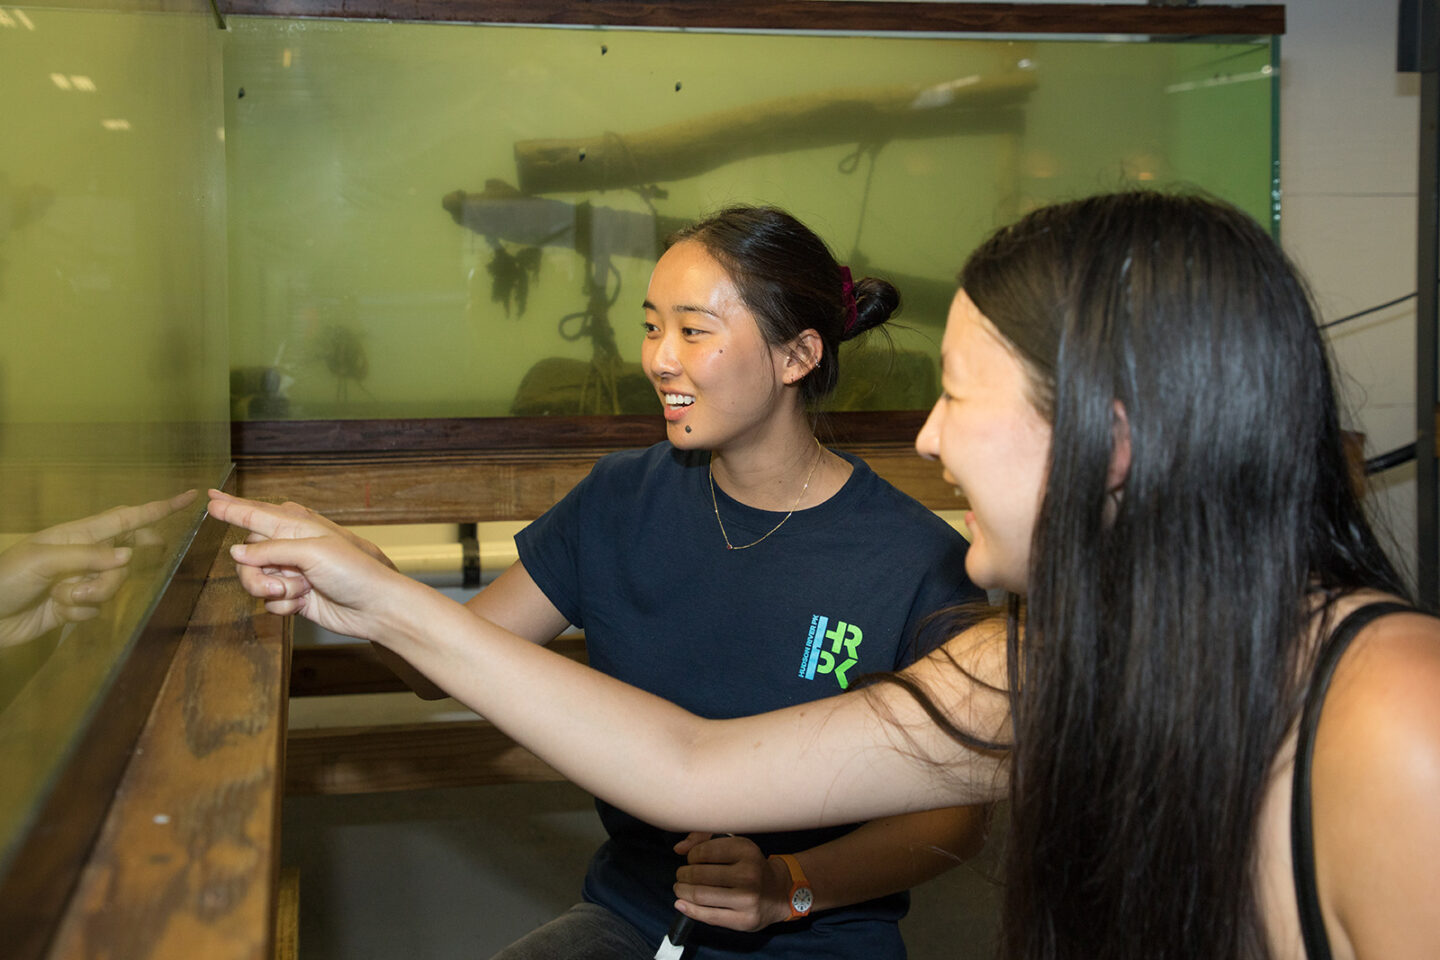 An HRPK River Project staffer leads a Wetlab visitor on a tour of an aquarium tank